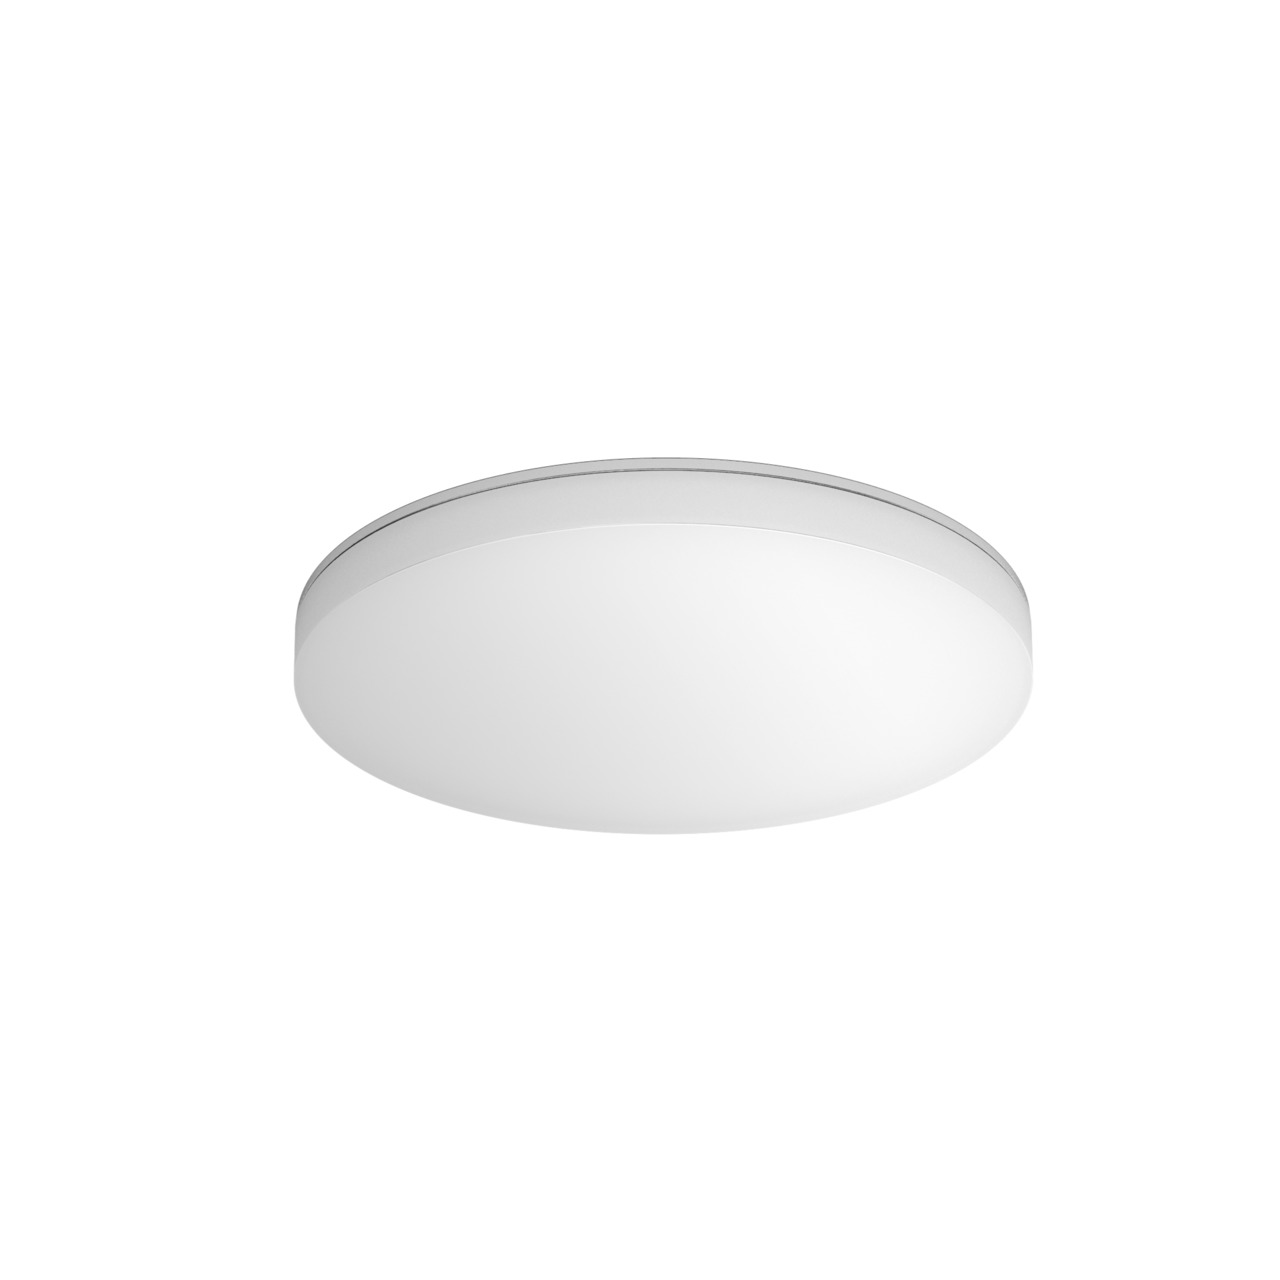 Steinel LED indoor luminaire RS PRO R10 PLUS SC NW - 4007841067700